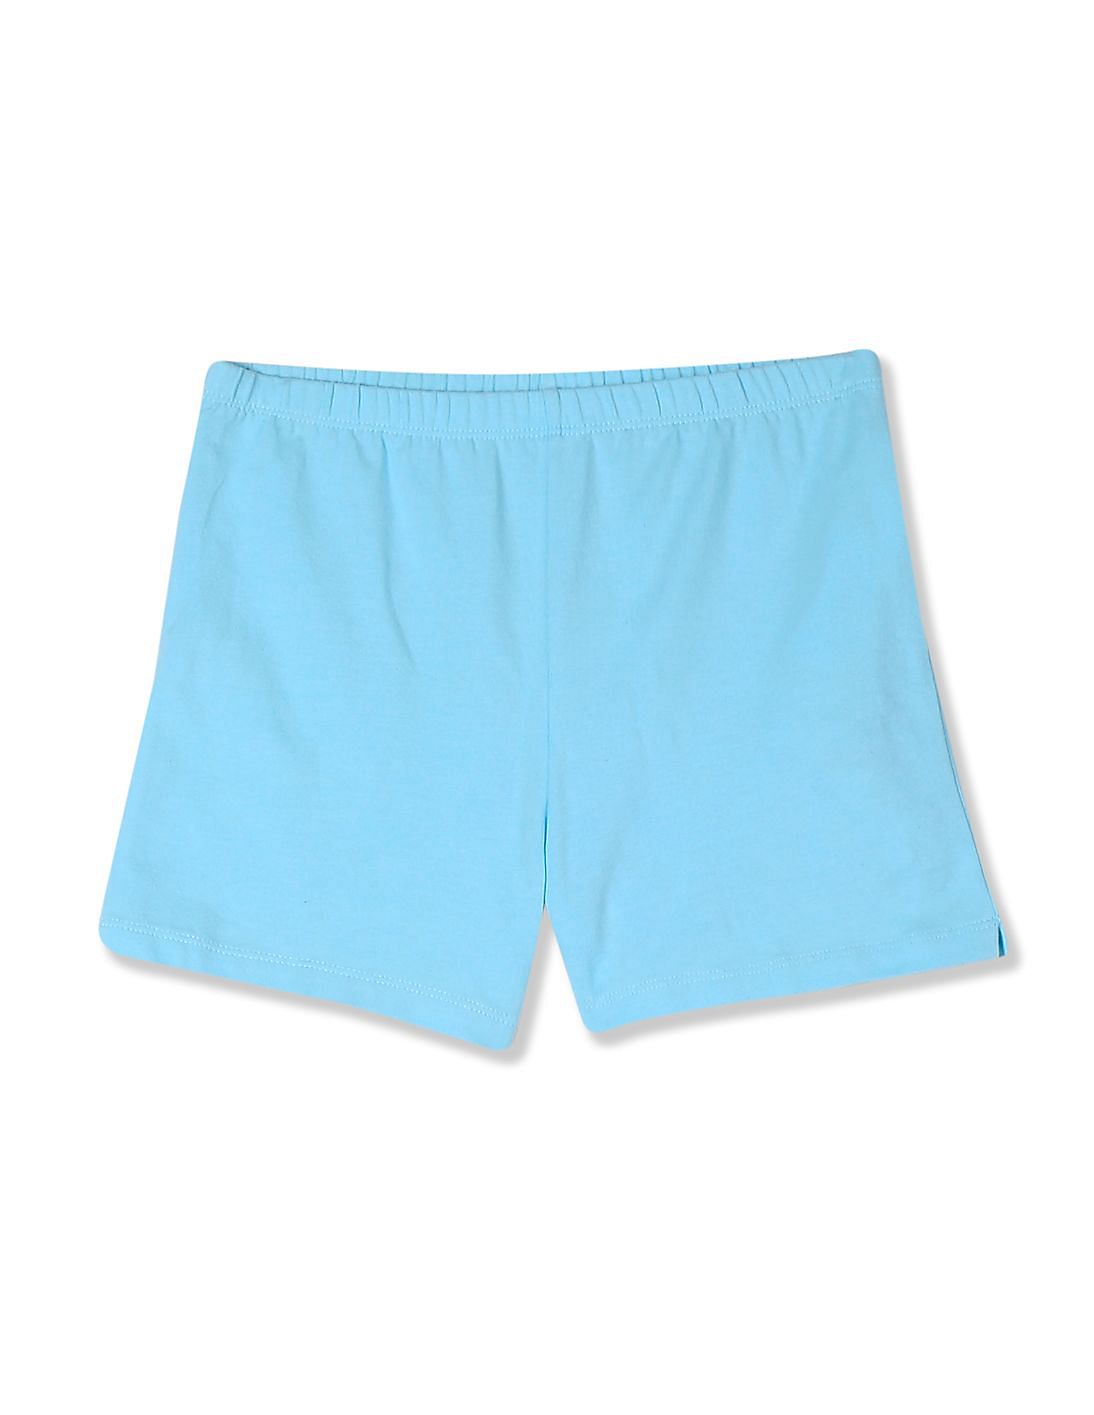 Buy The Children's Place Girls Girls Blue Knit Cotton Stretch Shorts ...